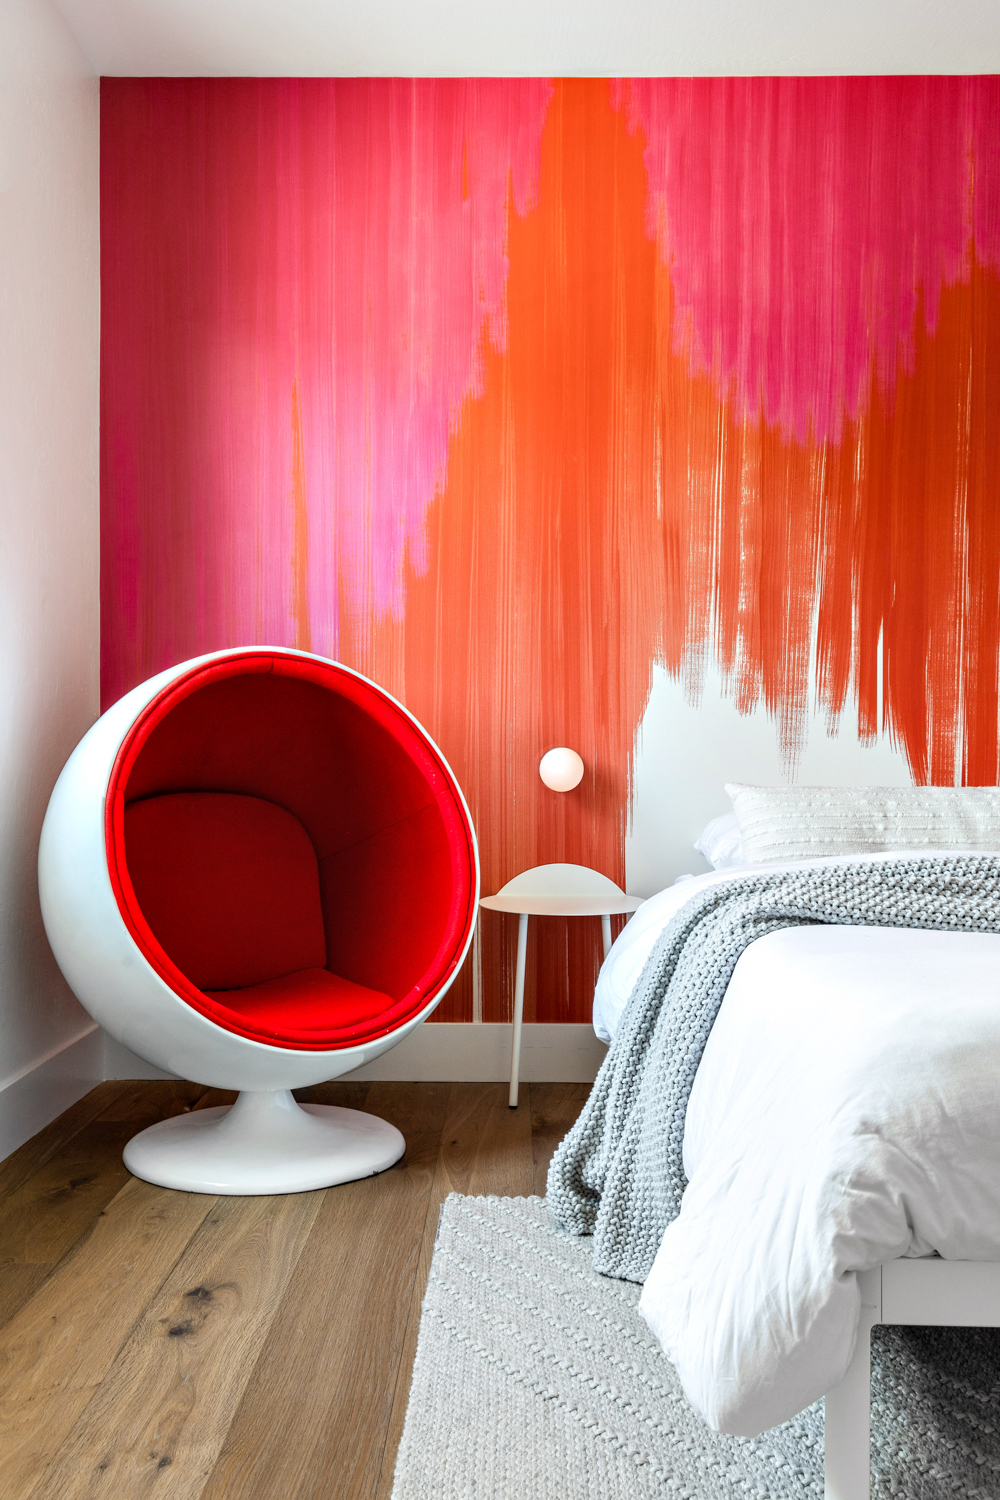 Iconic Design + Build bedroom with red and orange painted wall with red orb chair